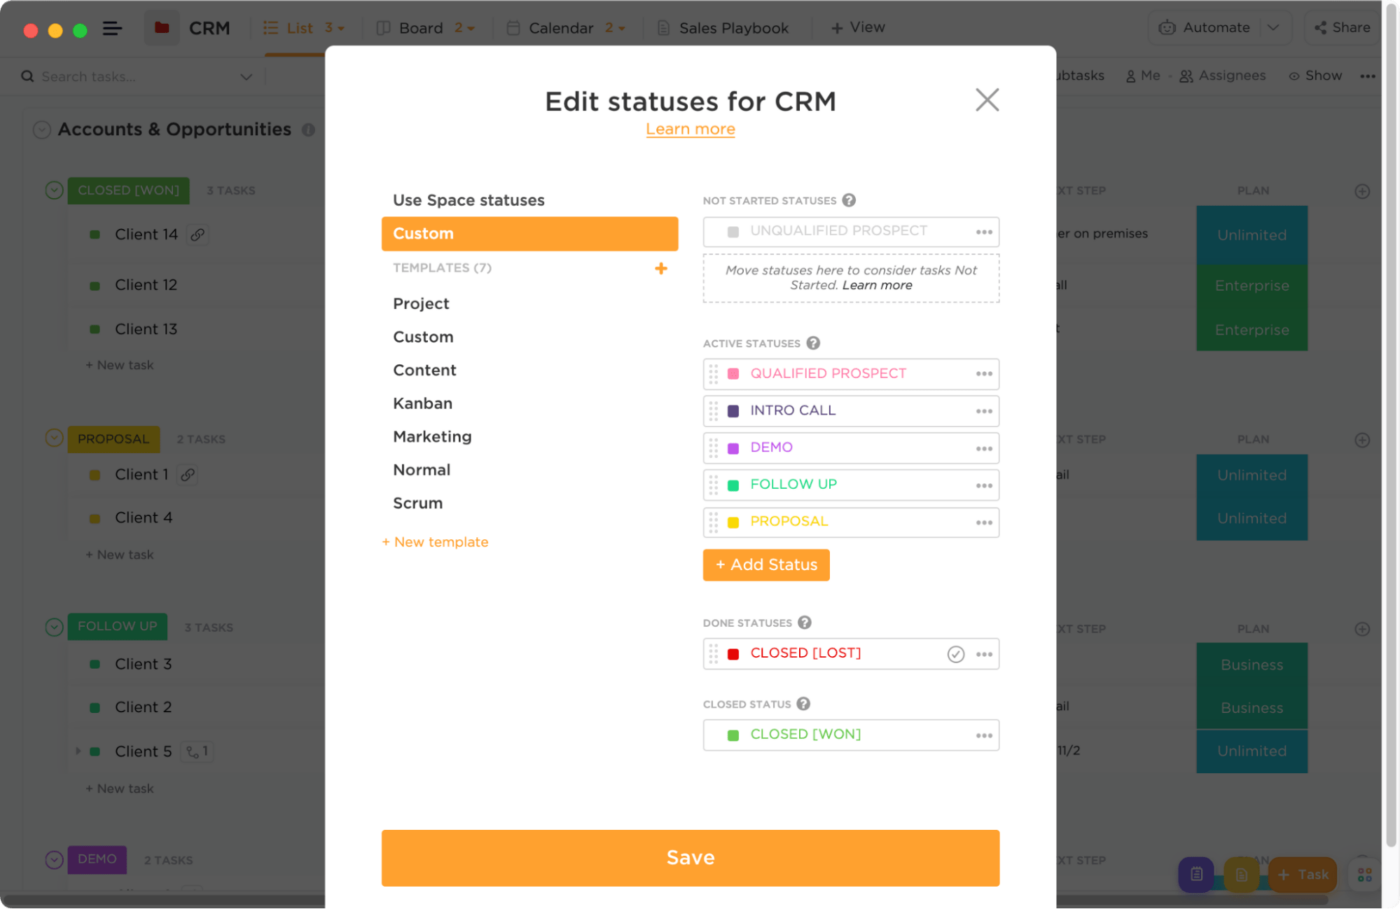 Create a business workflow for your sales pipeline to manage your custom crm in ClickUp